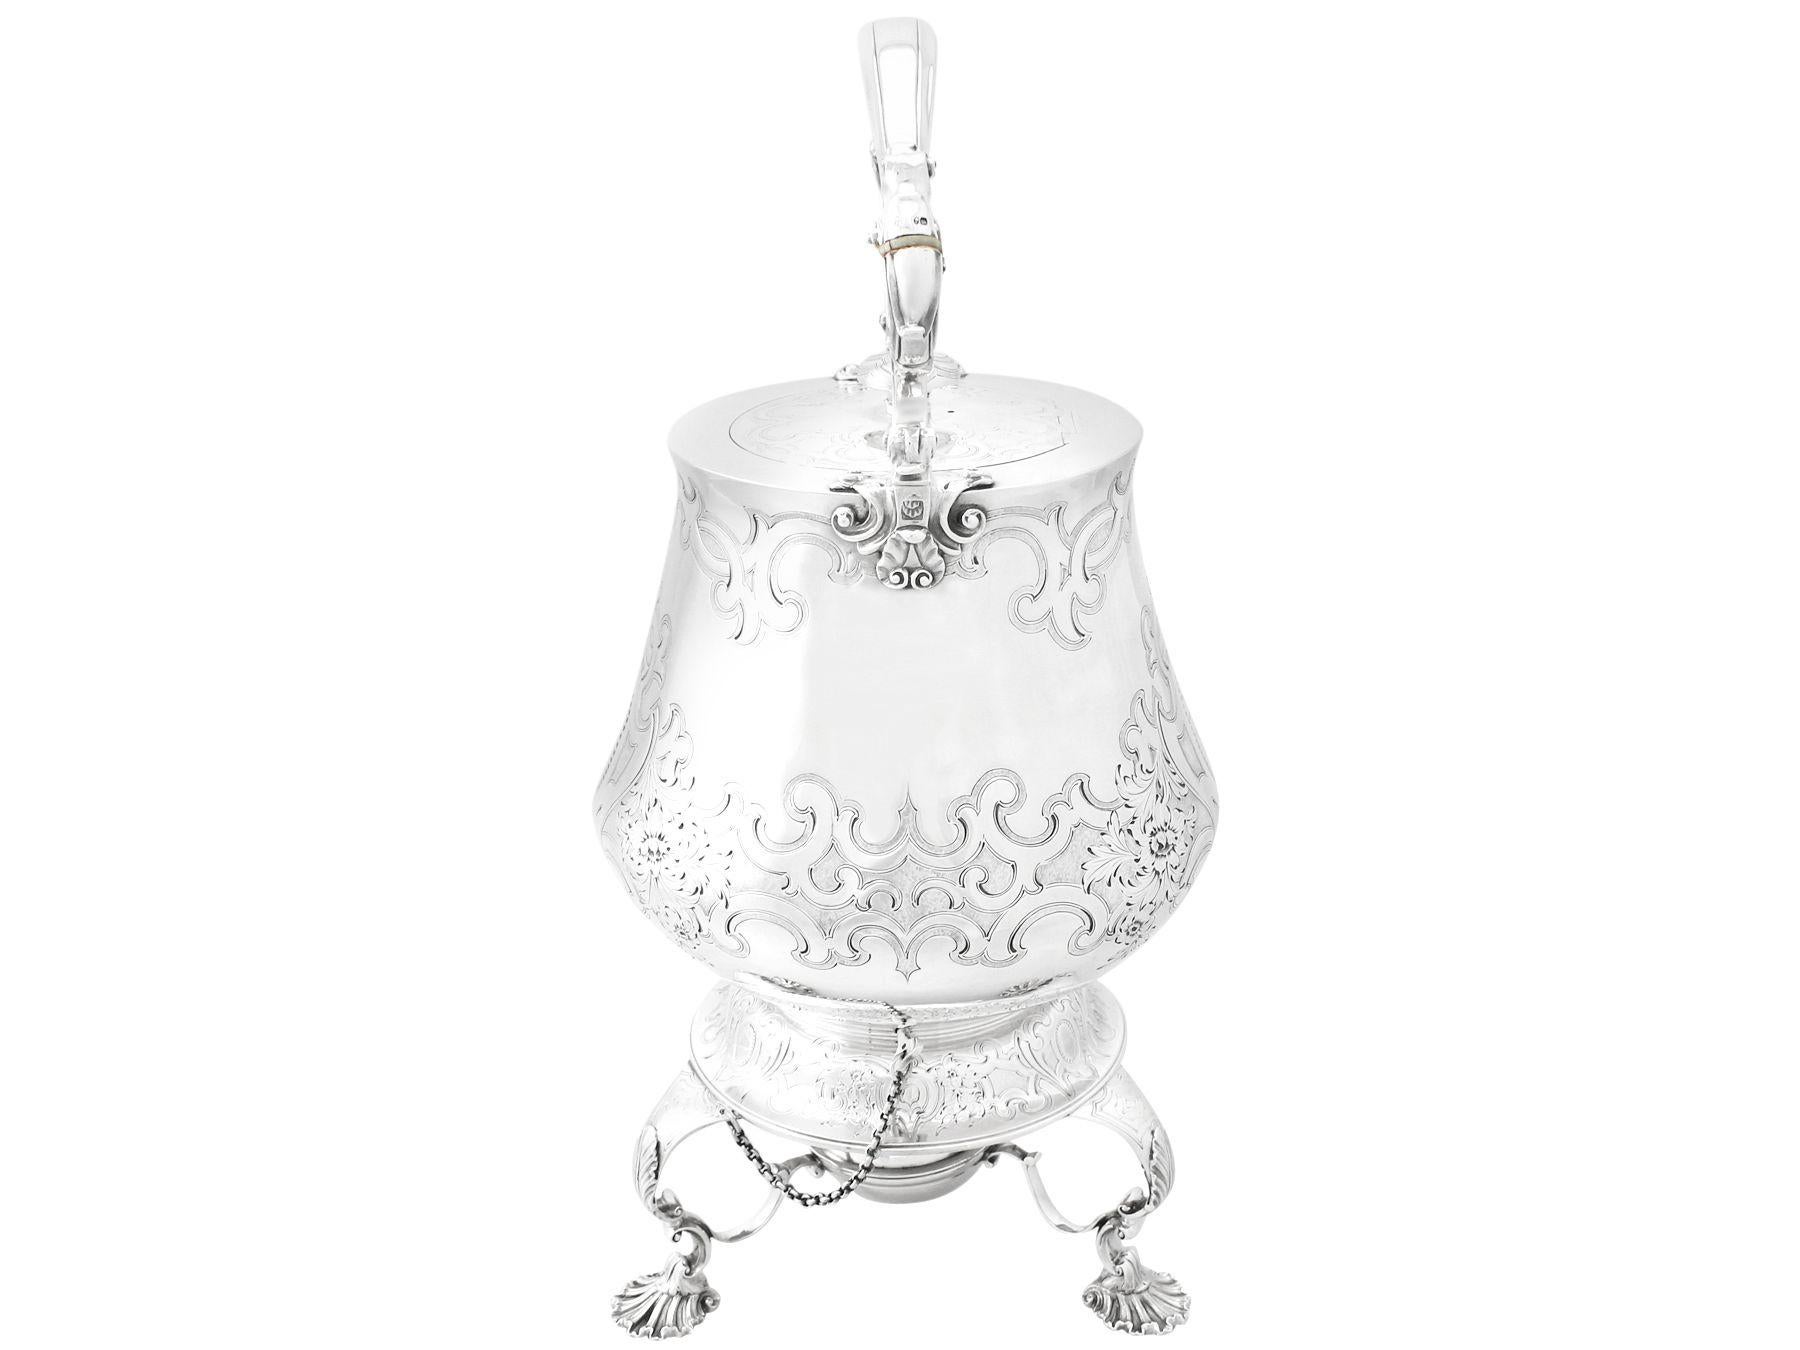 John Samuel Hunt Antique Victorian 1852 Sterling Silver Spirit Kettle In Excellent Condition For Sale In Jesmond, Newcastle Upon Tyne